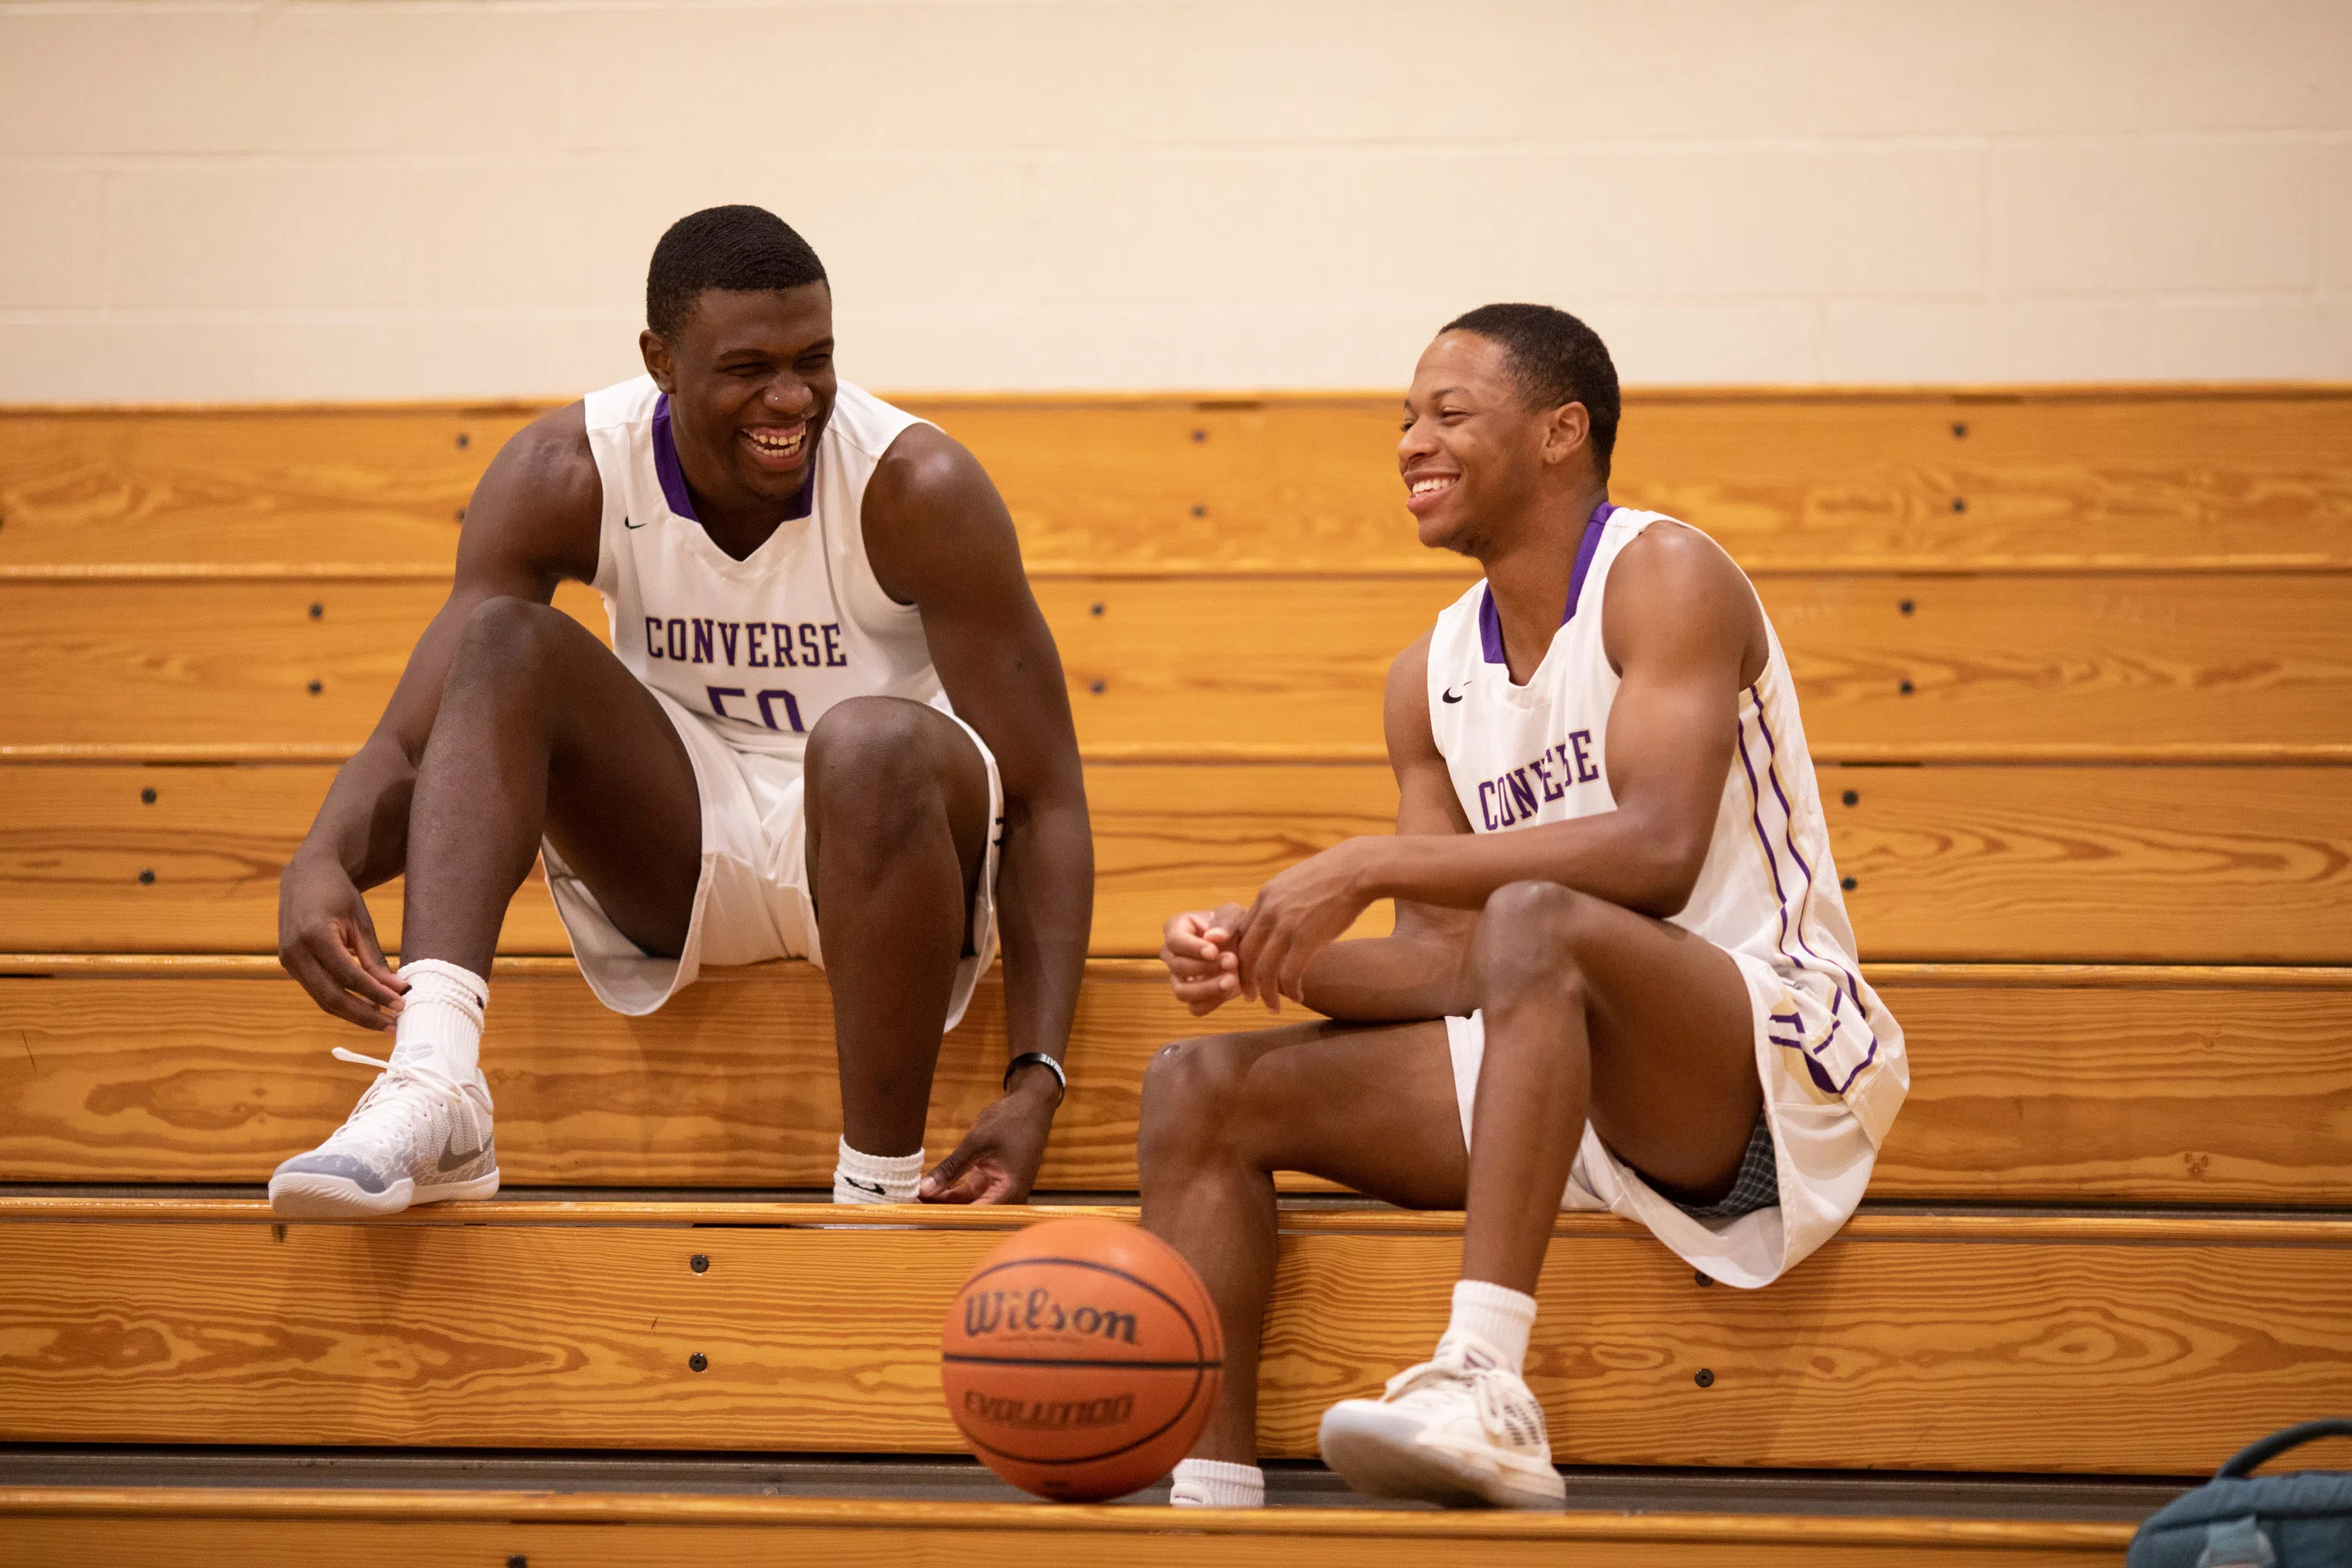 Two men sit on bleachers in white basketball uniforms with a basketball sitting between them.